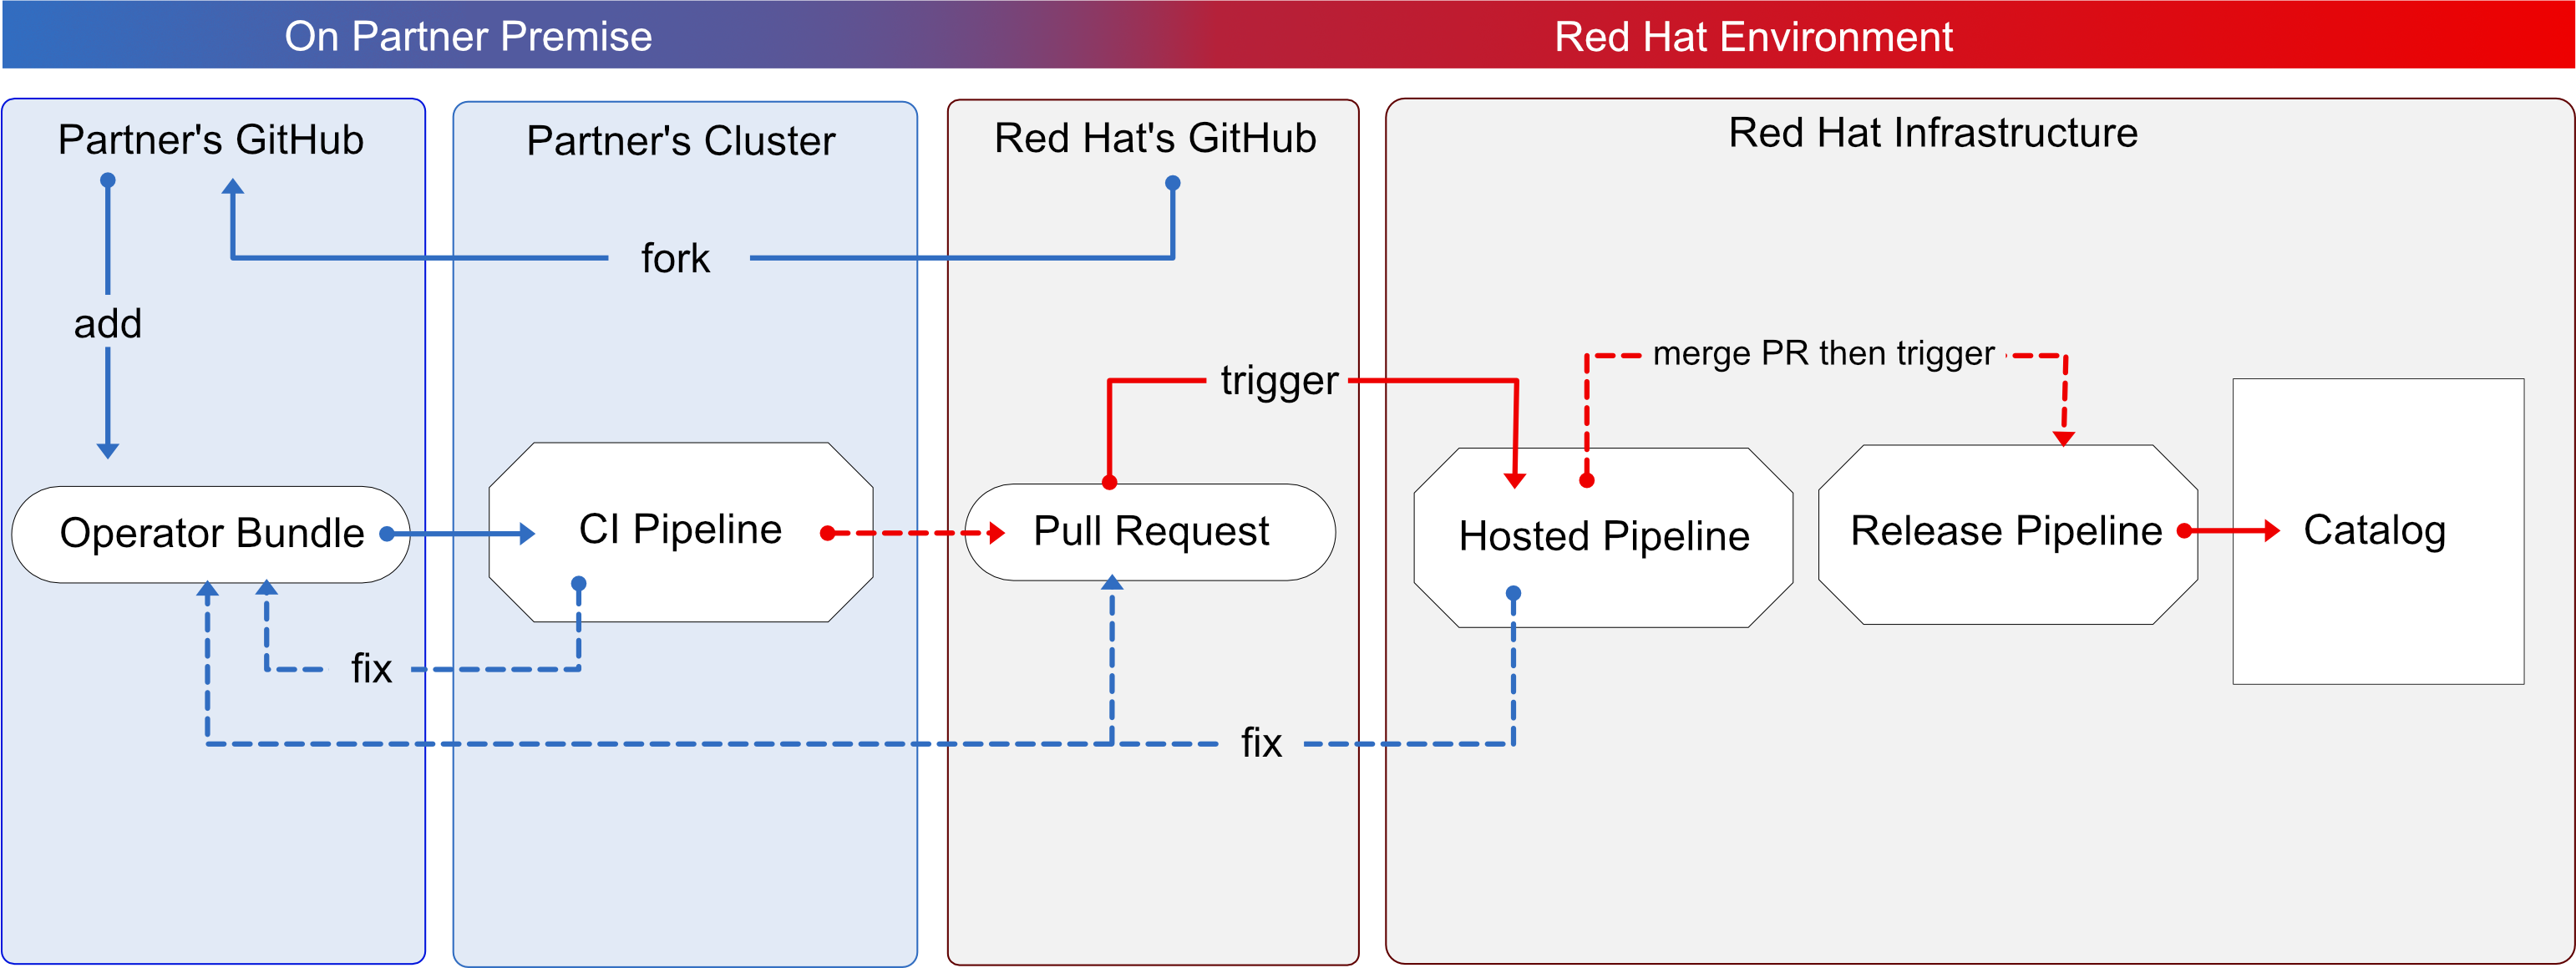 A flowchart that is a visual representation of running the certification test on Red Hat hosted pipeline